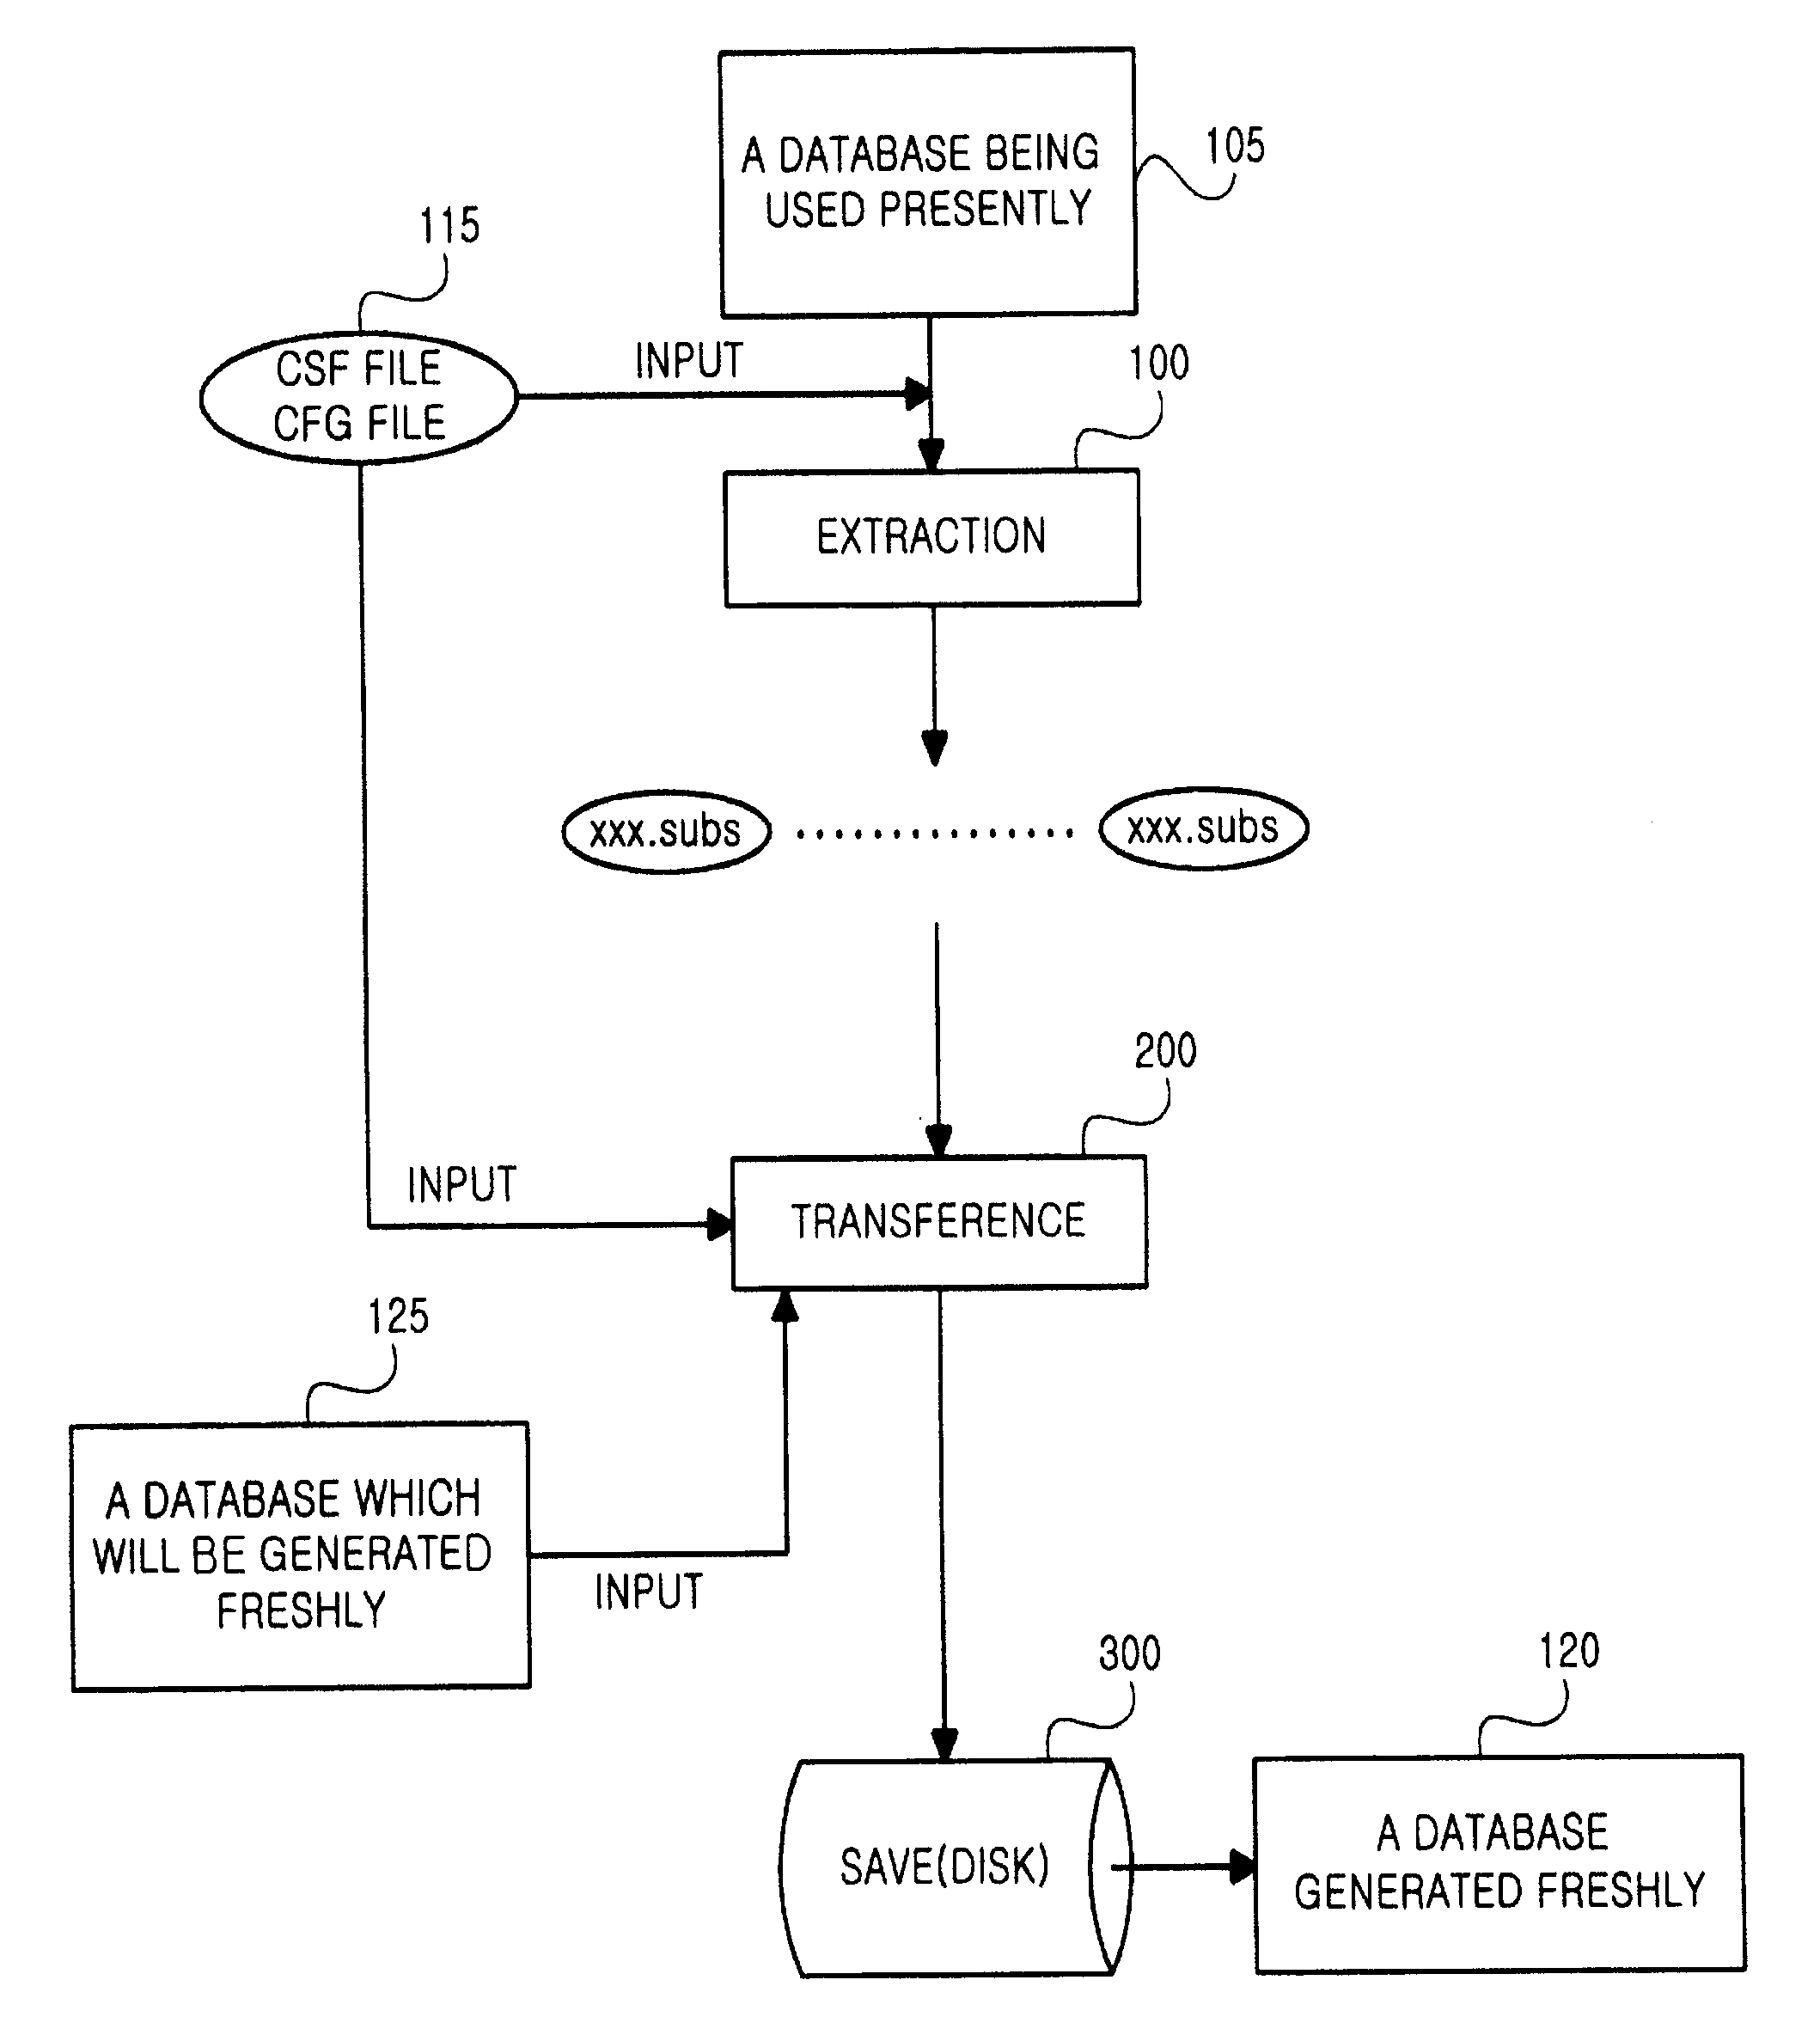 Method of modifying the home location register (HLR) system database for digital wireless communication whenever the database contents of main memory are altered